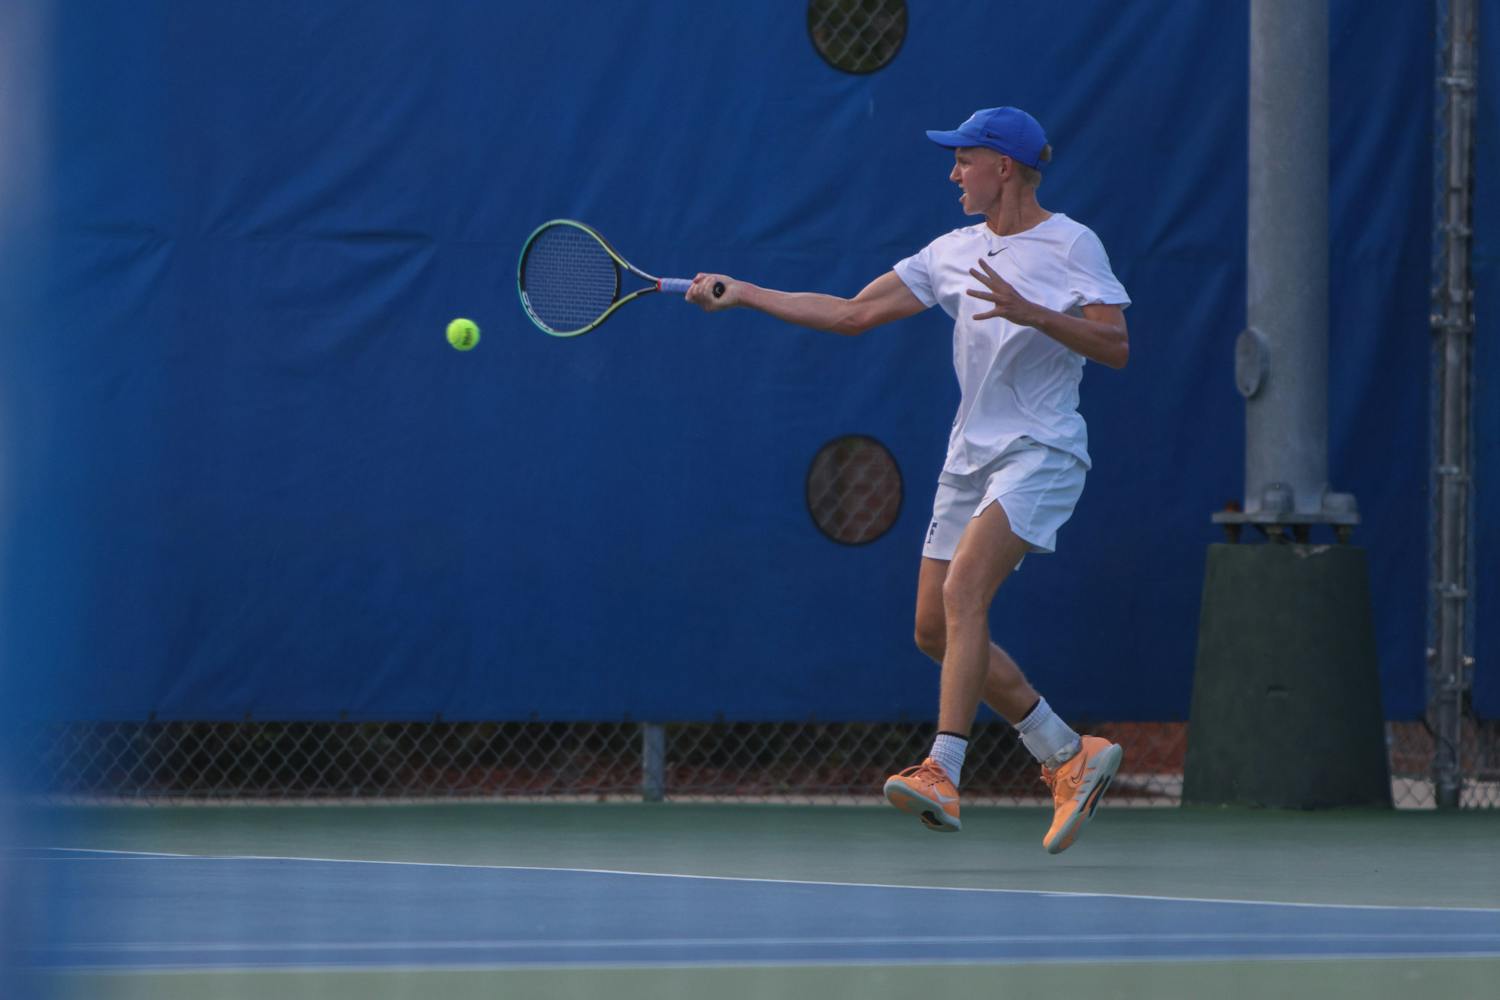 Florida senior Lukas Greif hits the ball with his racket during the Gators' 6-1 win over the Arkansas Razorbacks Friday, March 24, 2023.